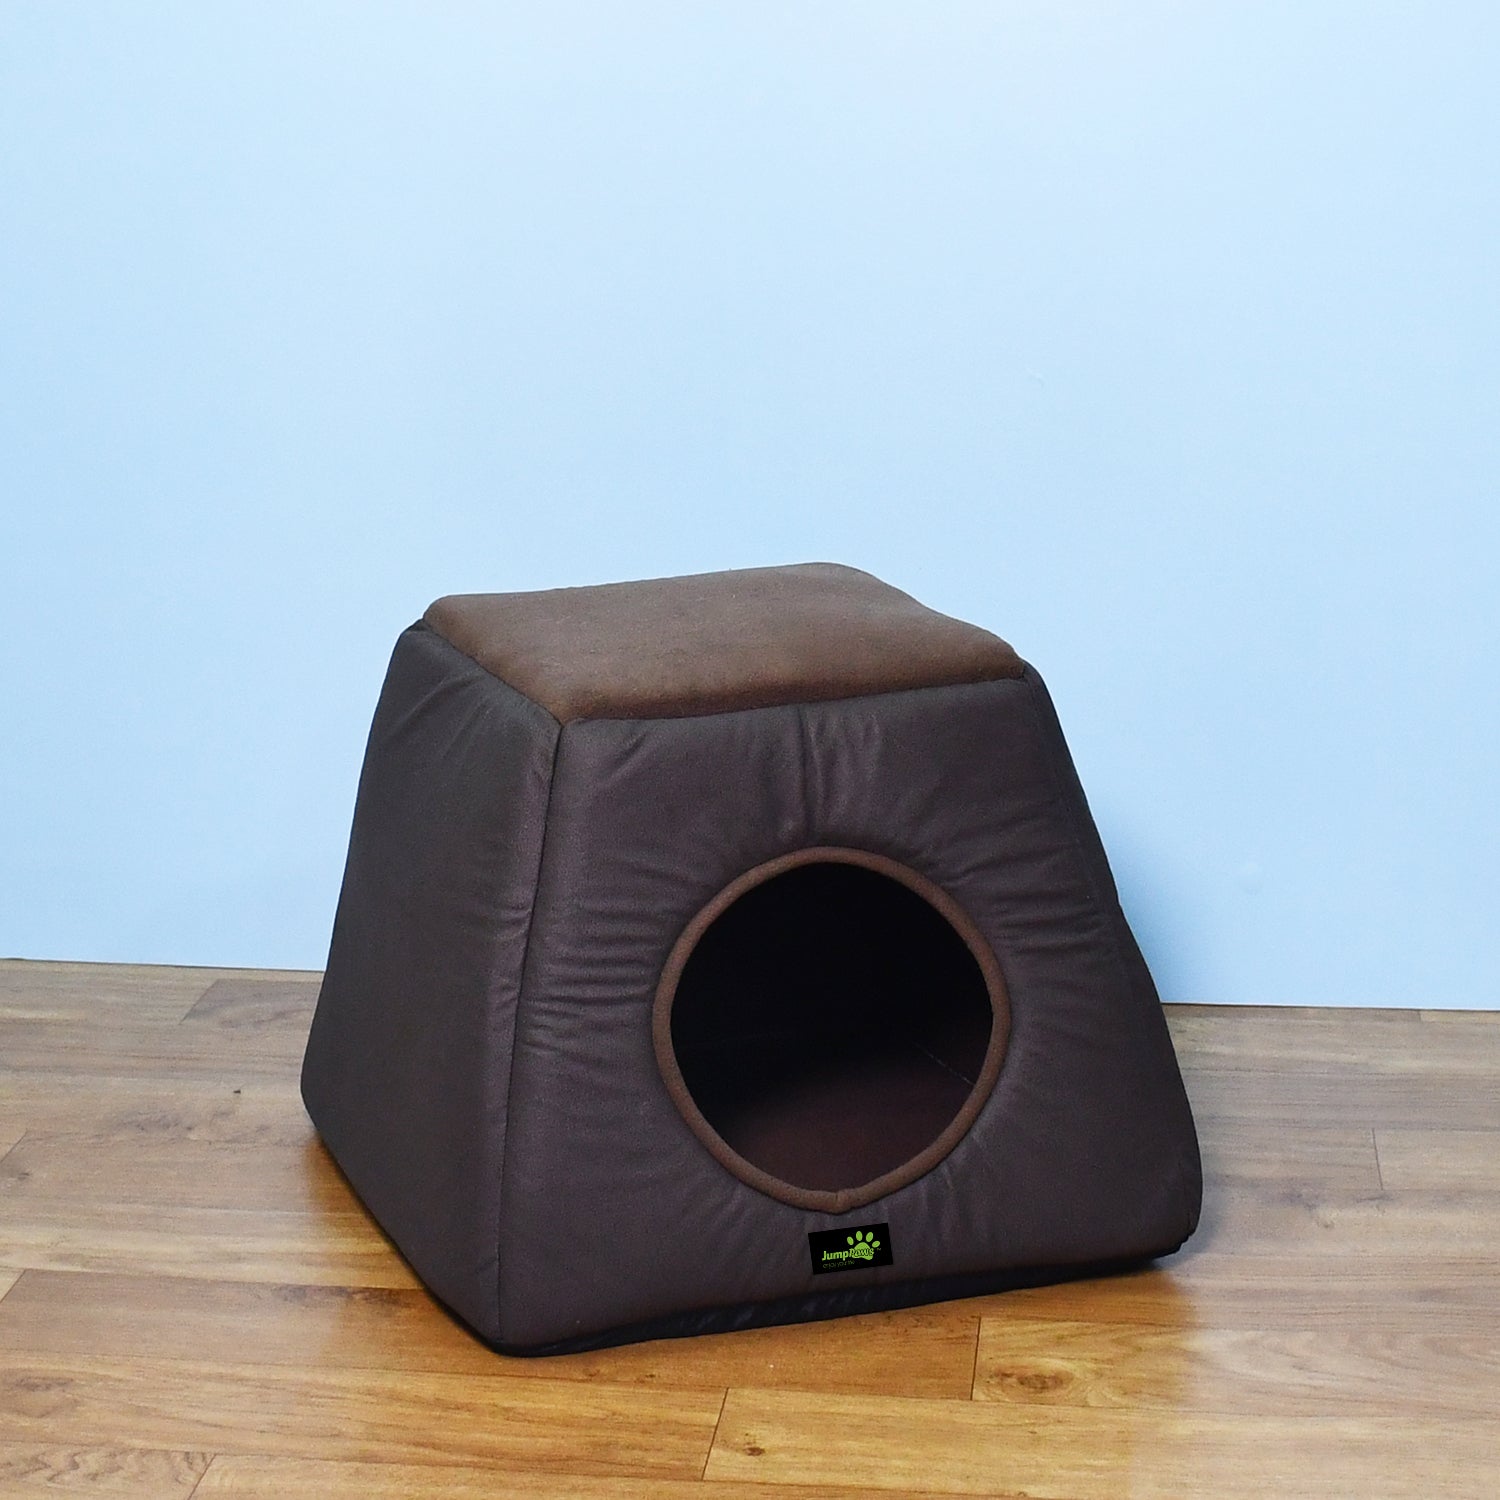 JumpPaws 3-In-1 Pet Bed, Igloo Dog Cat House, Convertible Cat and Dog Cave Bed, Coffee, 16.1"L x 11.4"W x 13.0"Th